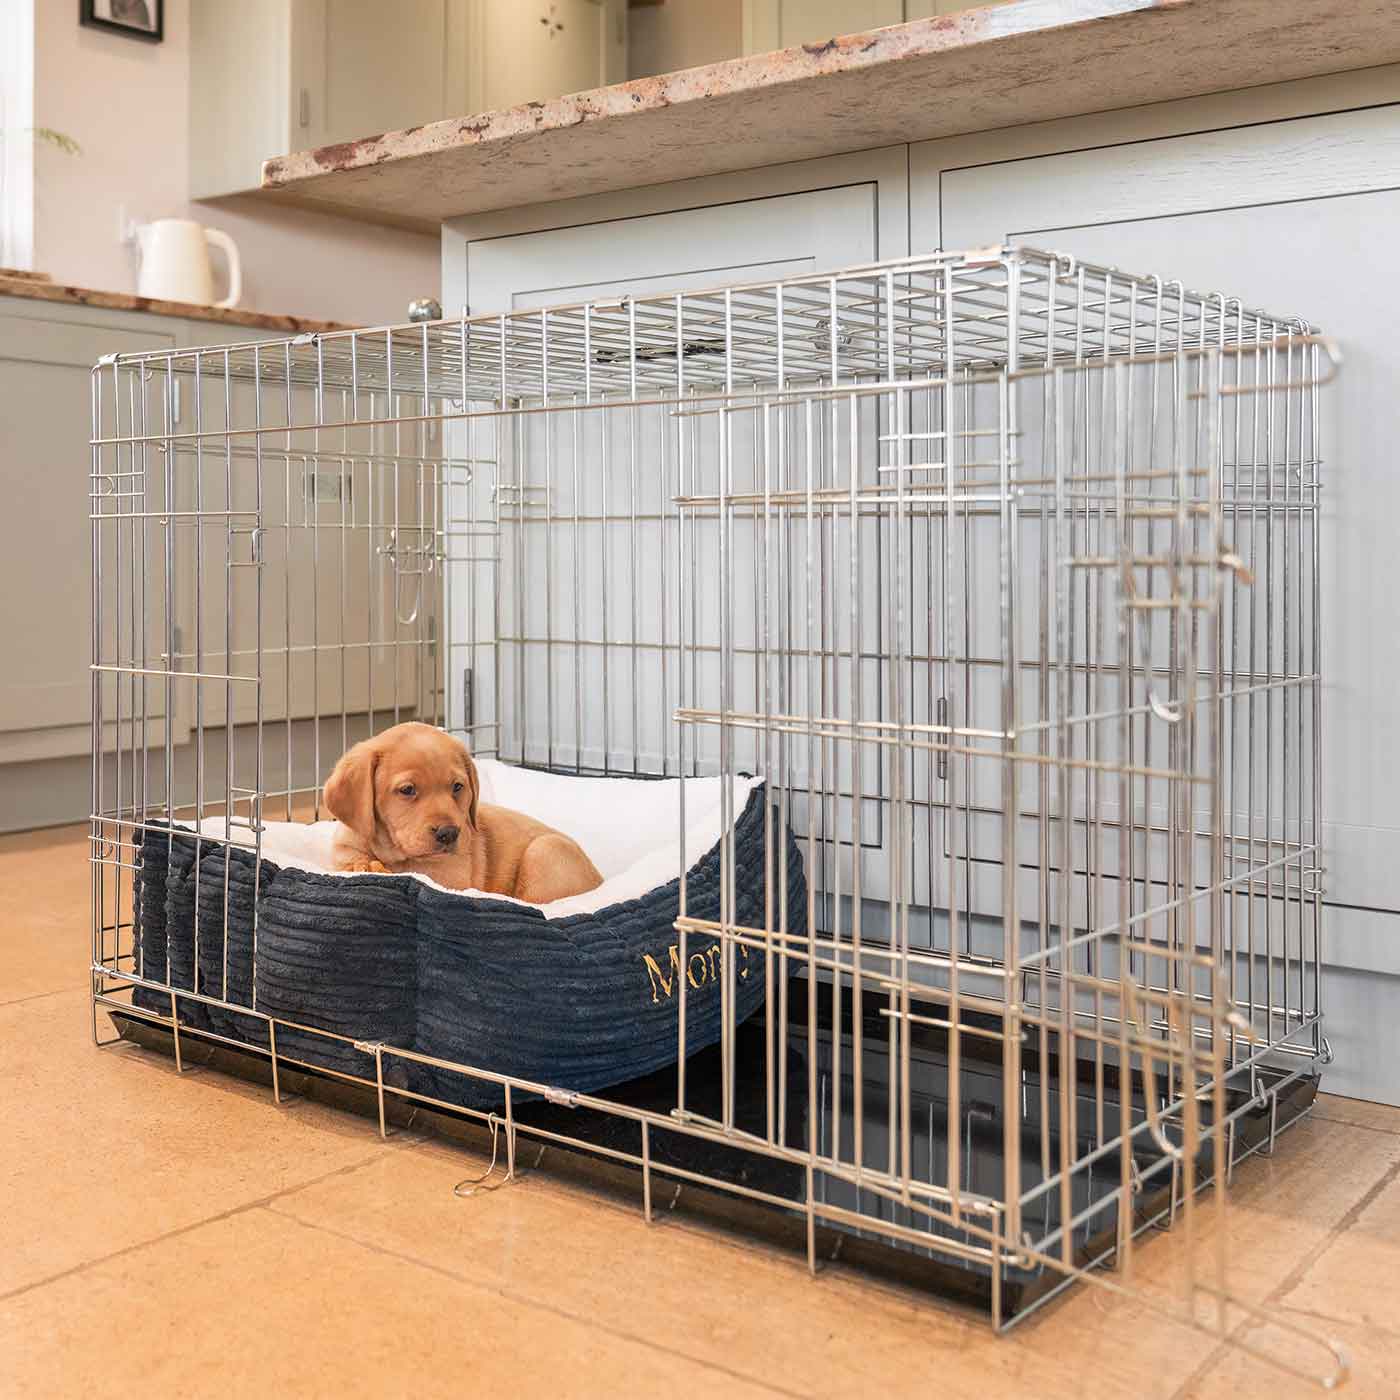 Cozy & Calm Puppy Cage Bed, The Perfect Dog Cage Accessory For The Ultimate Dog Den! In Stunning Navy Essentials Plush! Available To Personalize at Lords & Labradors US